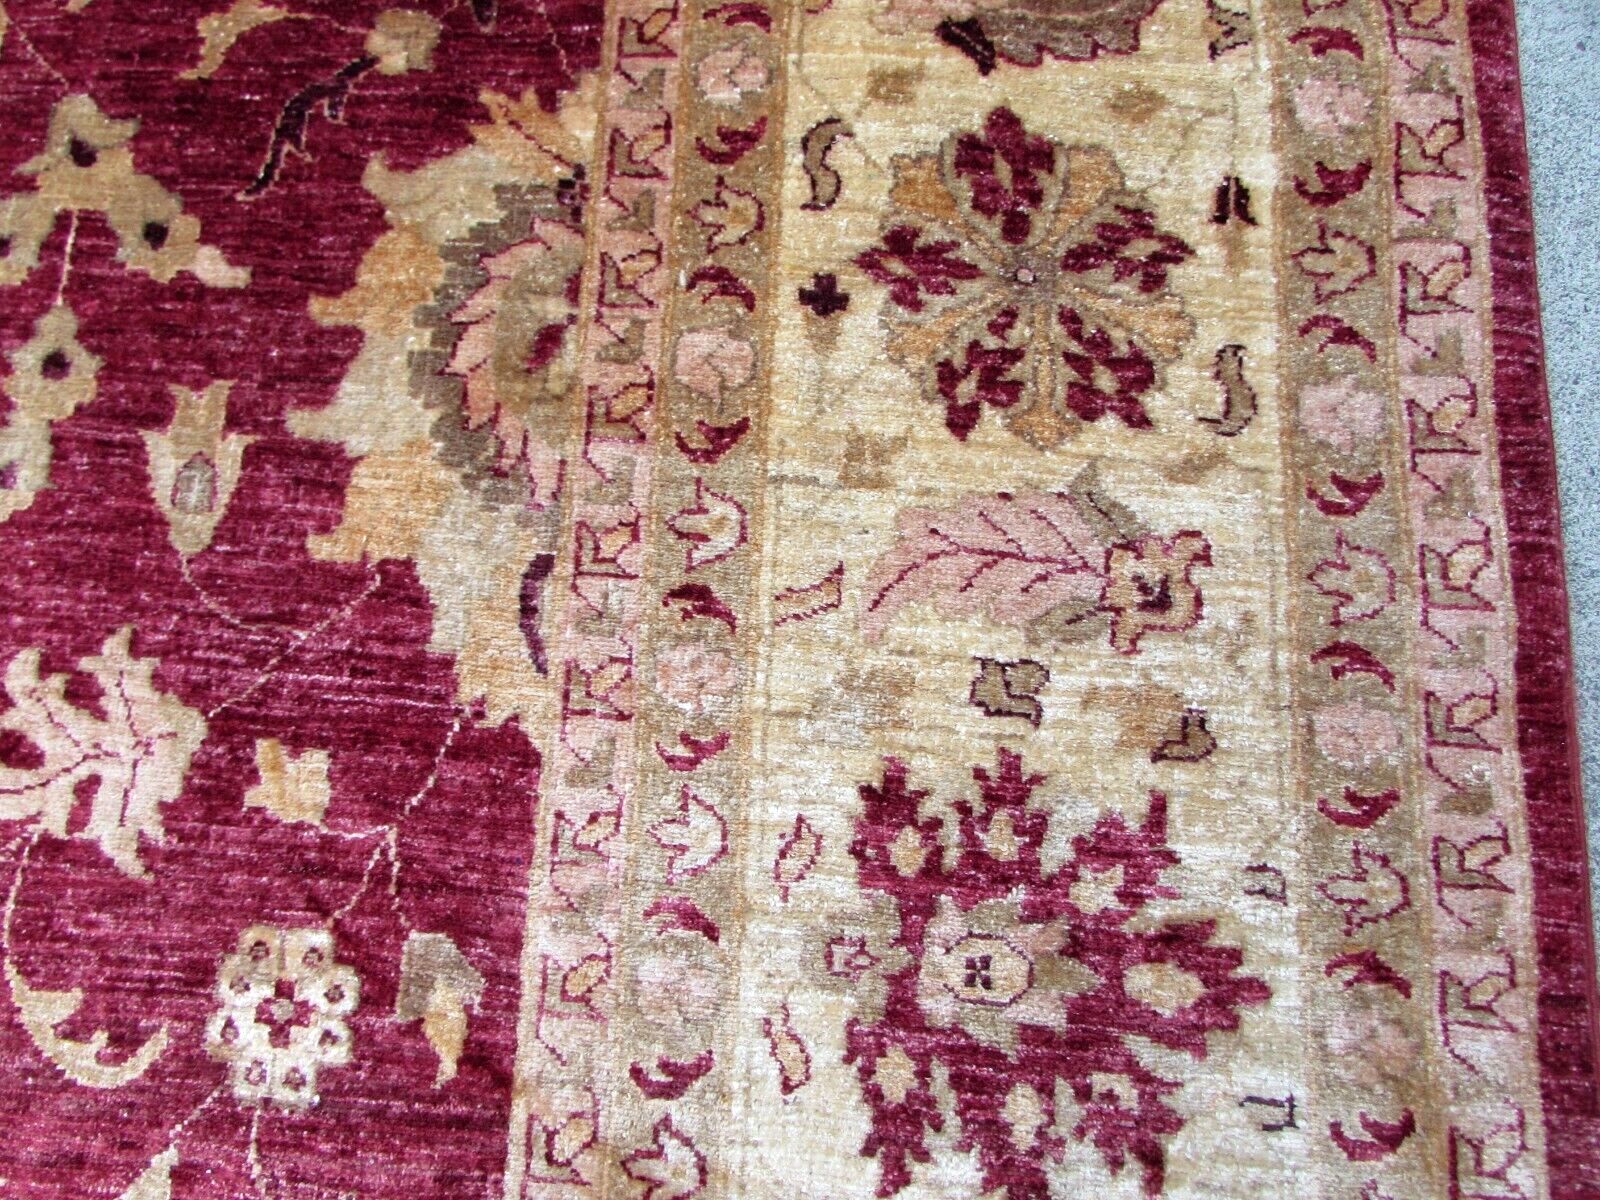 Up-close shot of the beige and olive colors in the rug's design